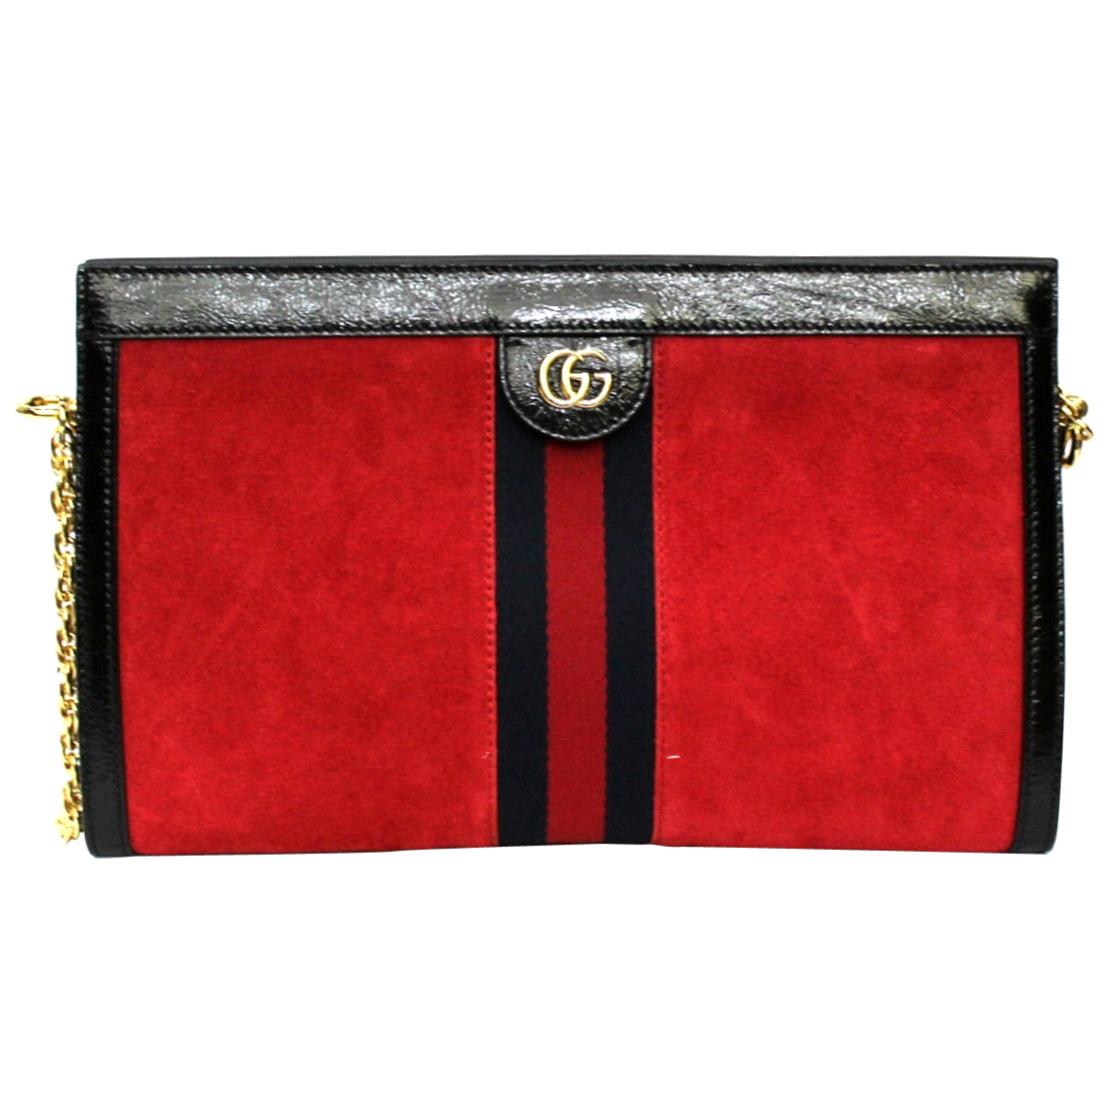 2020 Gucci Ophidia Red Suede Bag